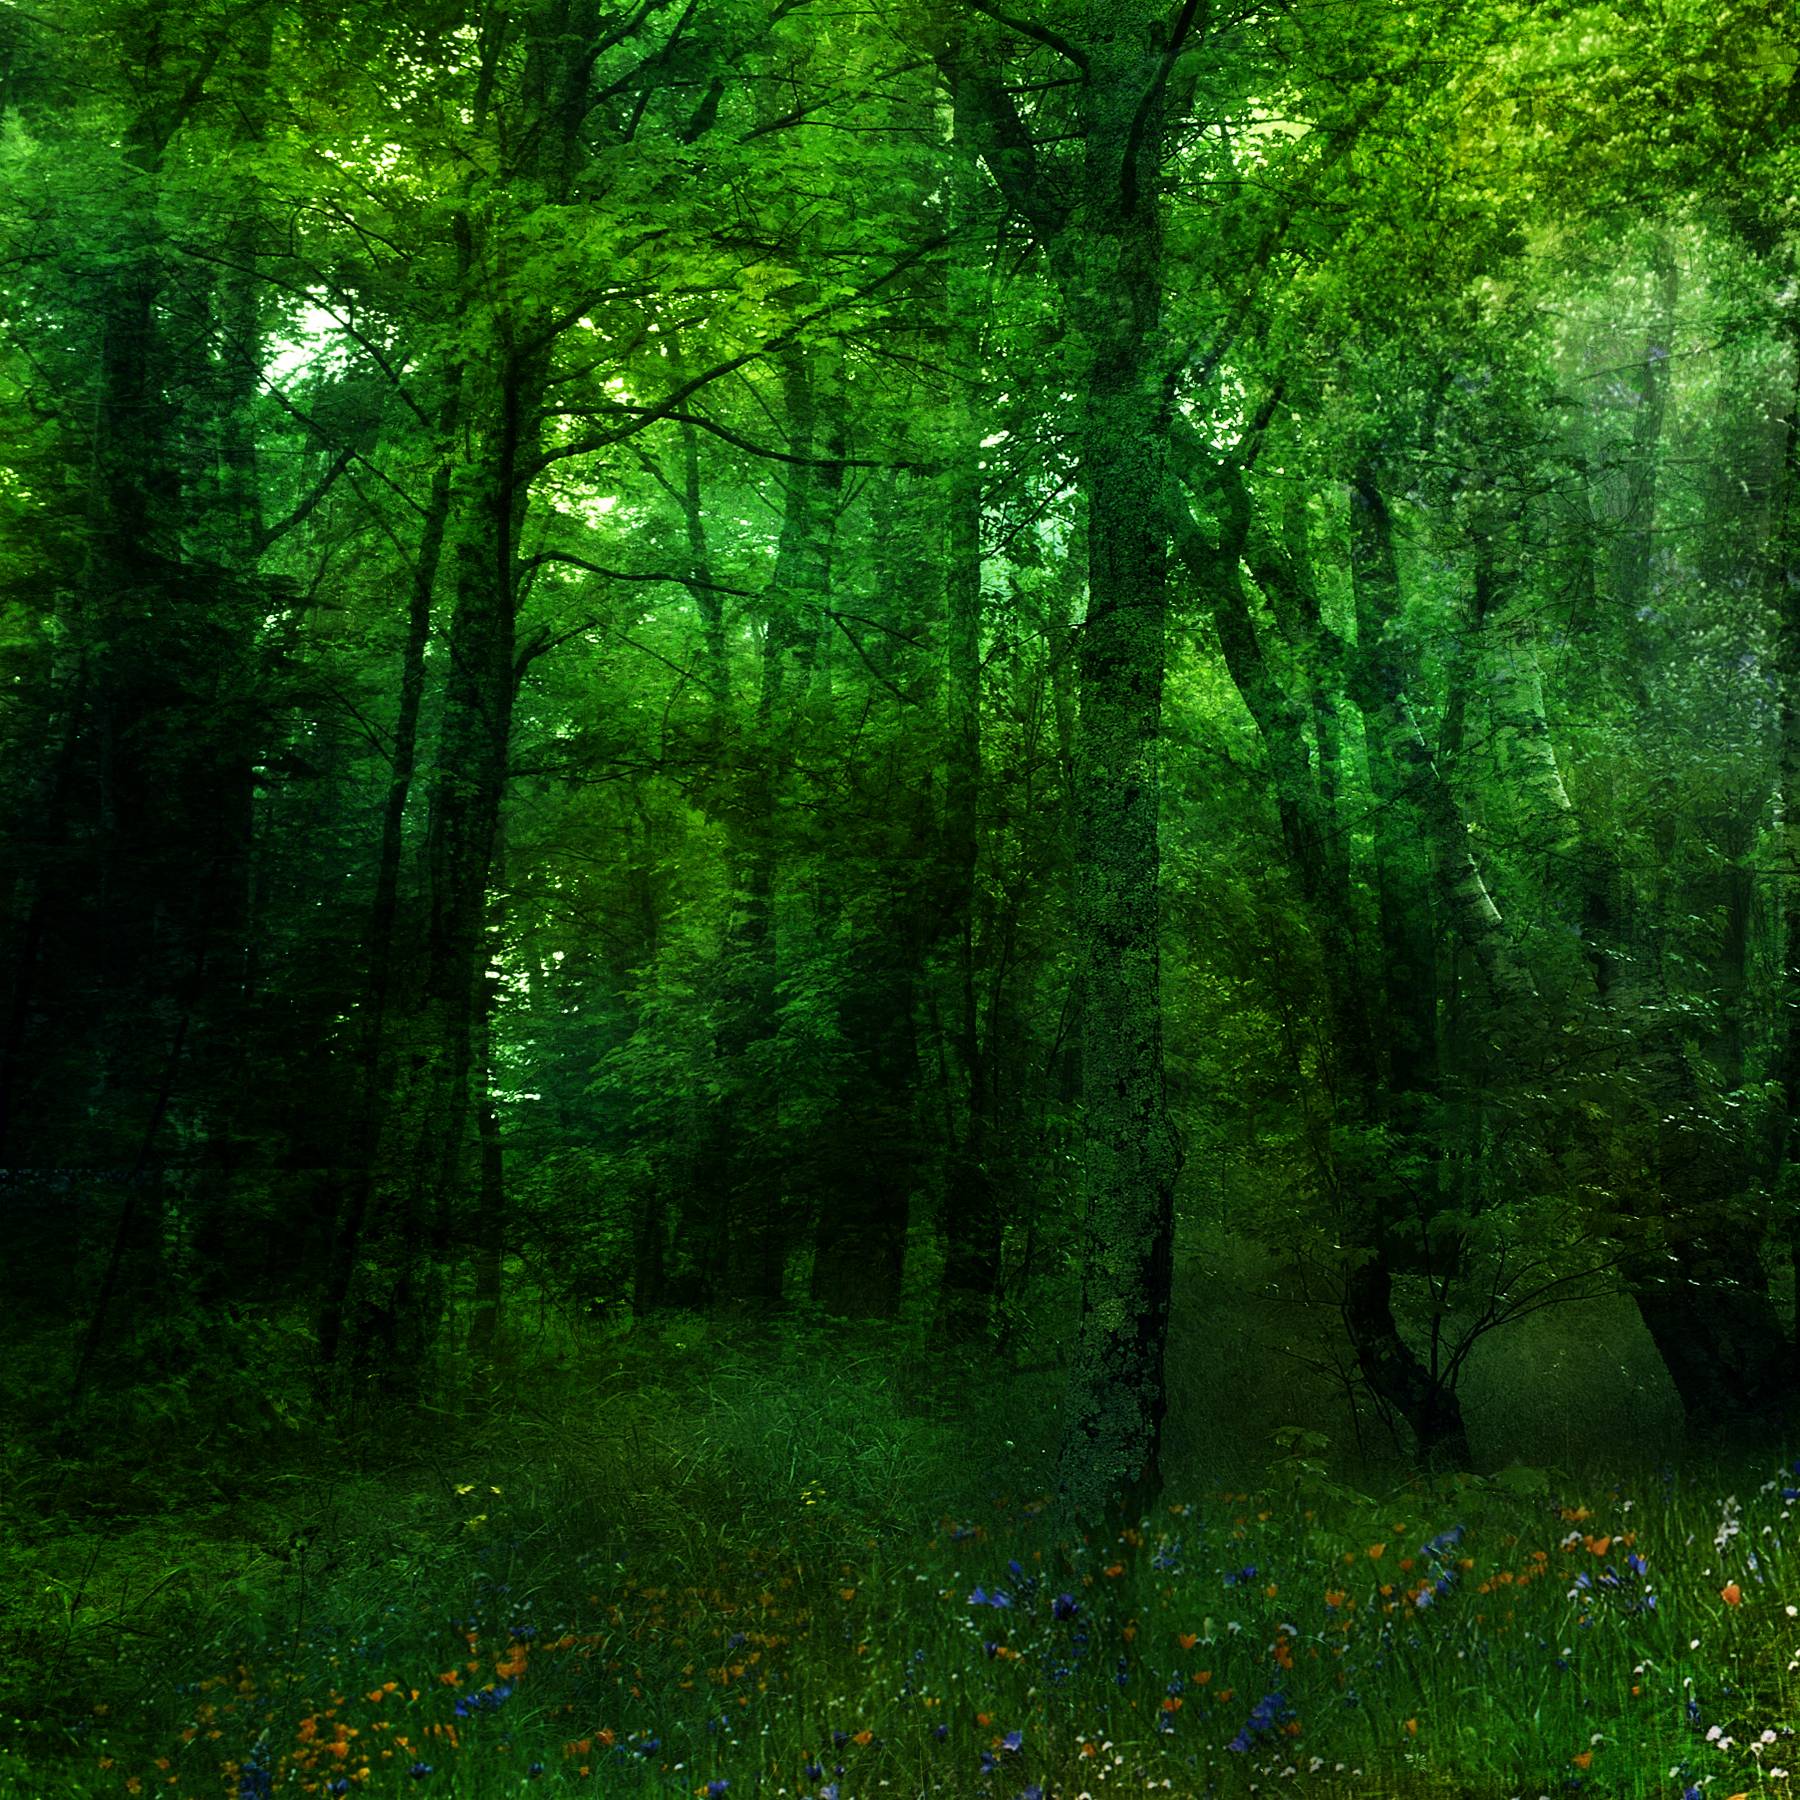 Green Forest Background